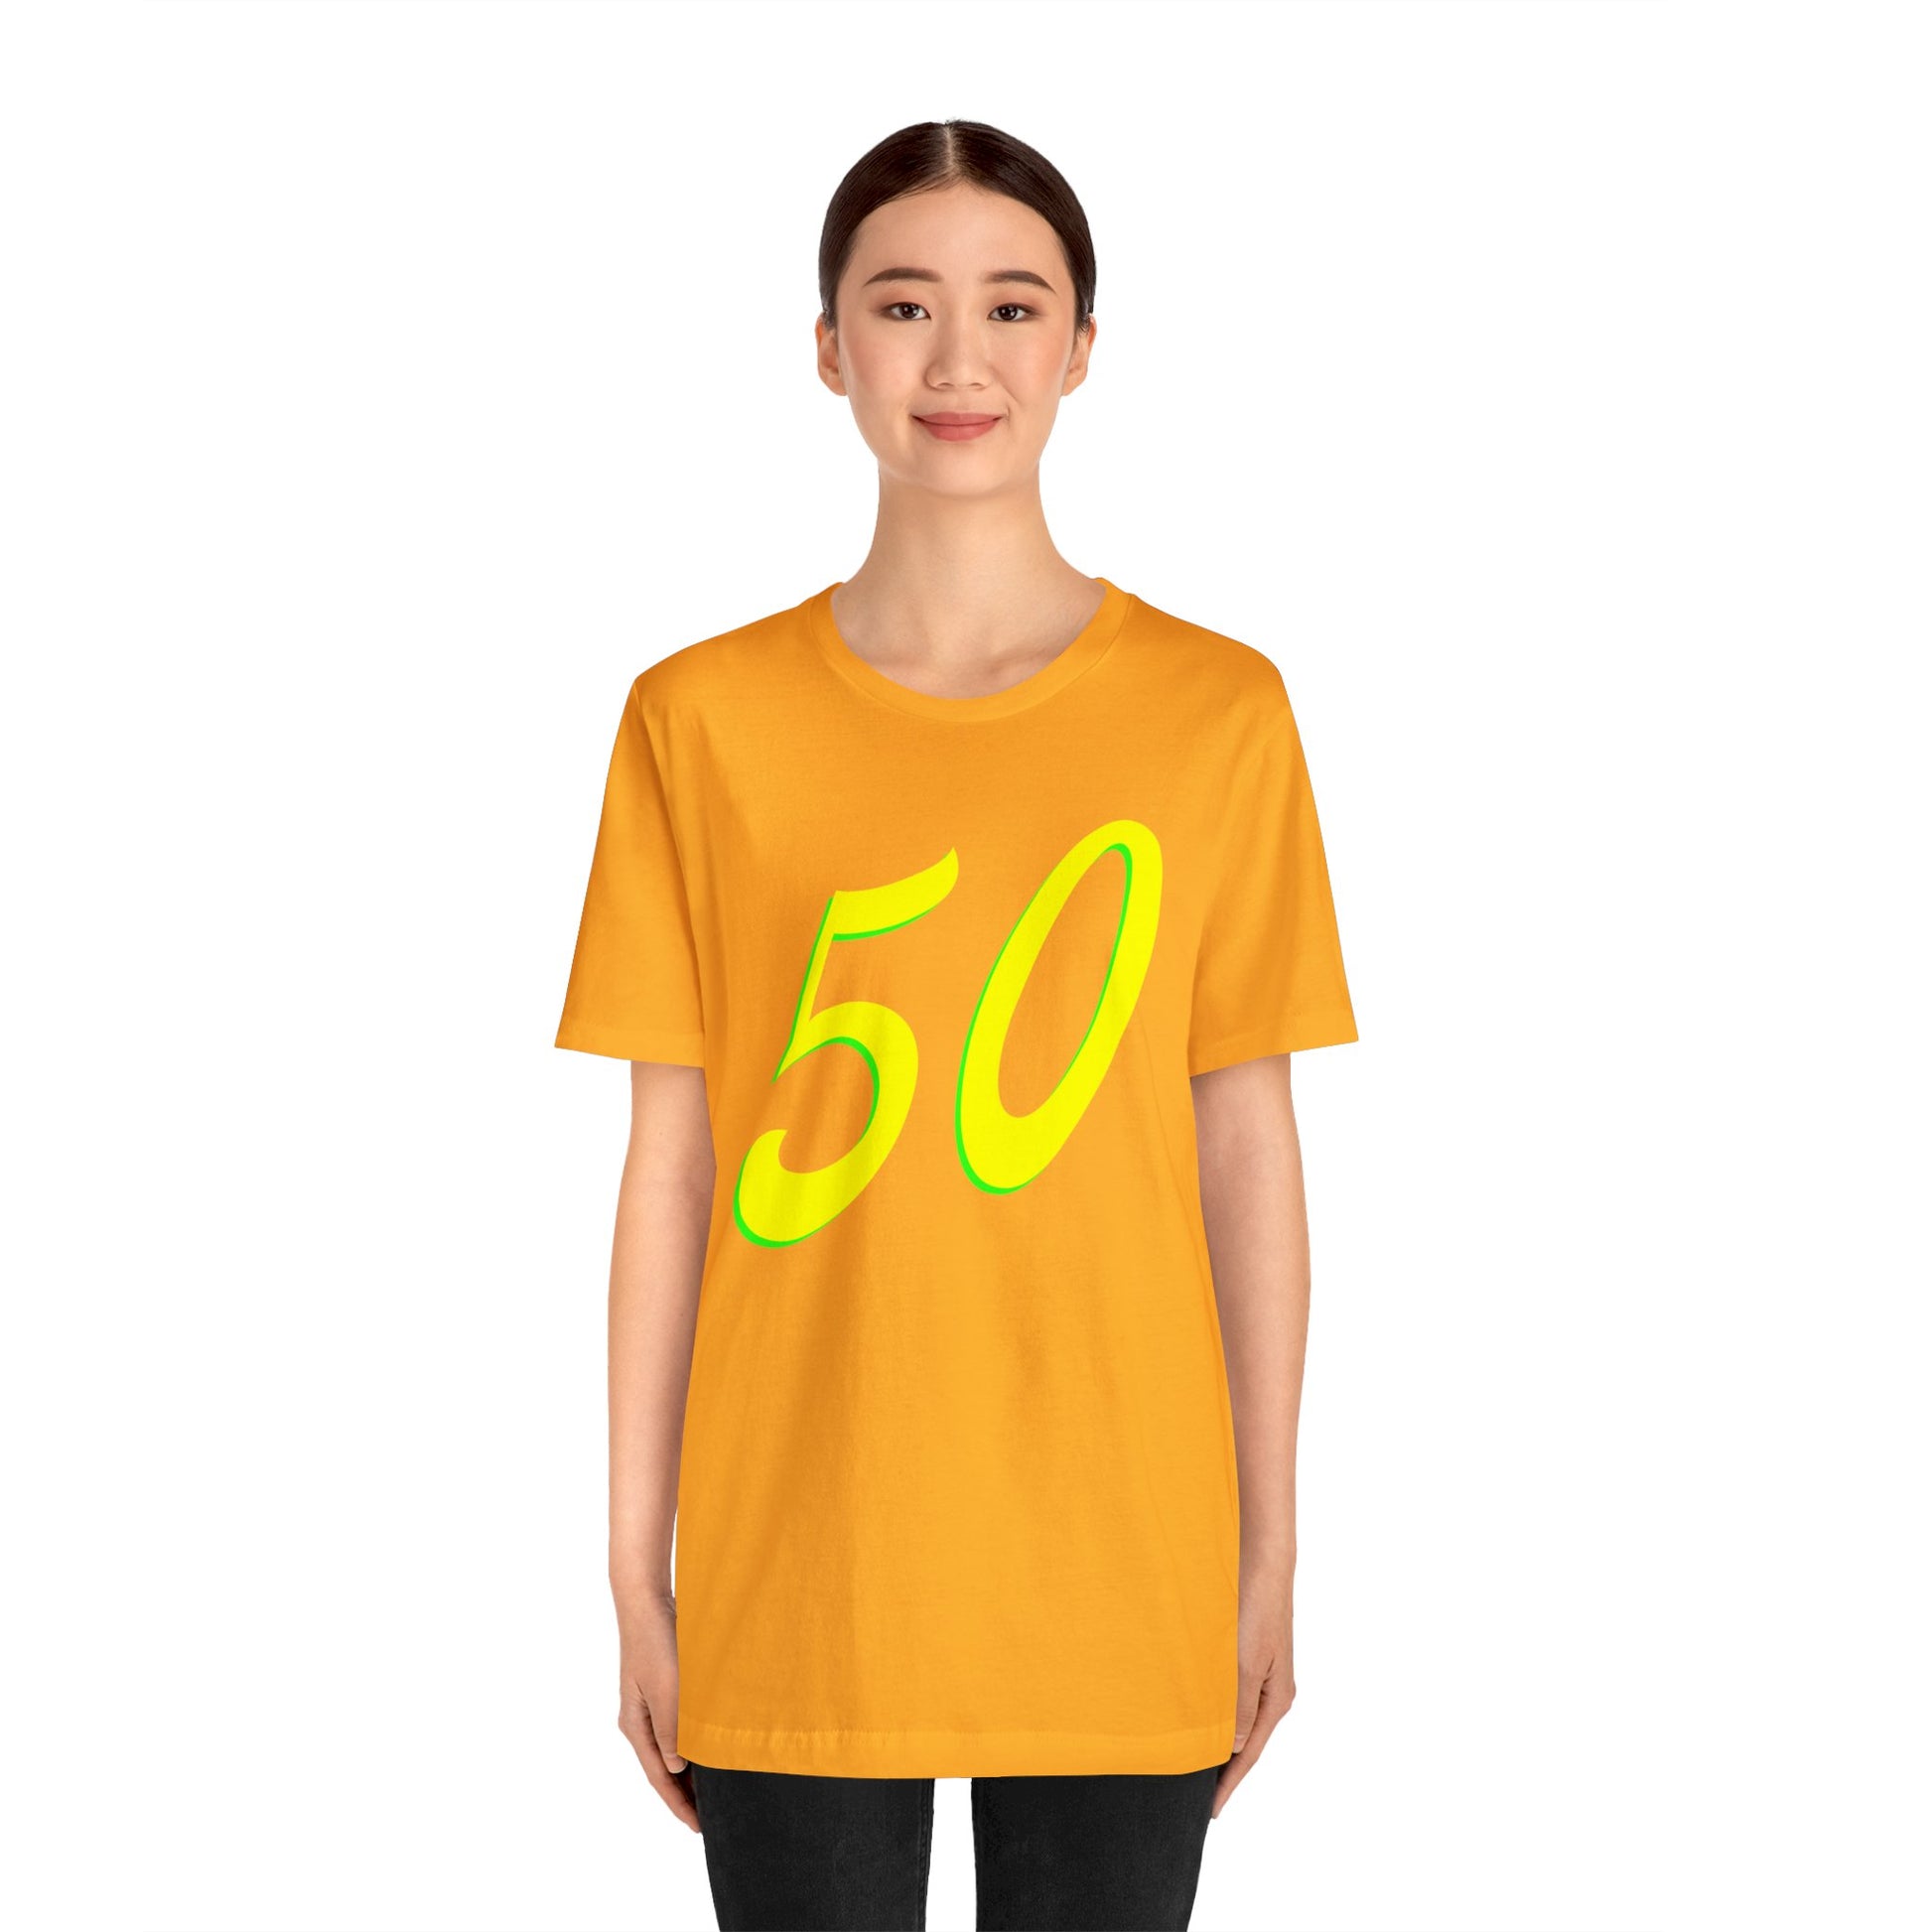 Number 50 Design - Soft Cotton Tee for birthdays and celebrations, Gift for friends and family, Multiple Options by clothezy.com in Asphalt Size Medium - Buy Now